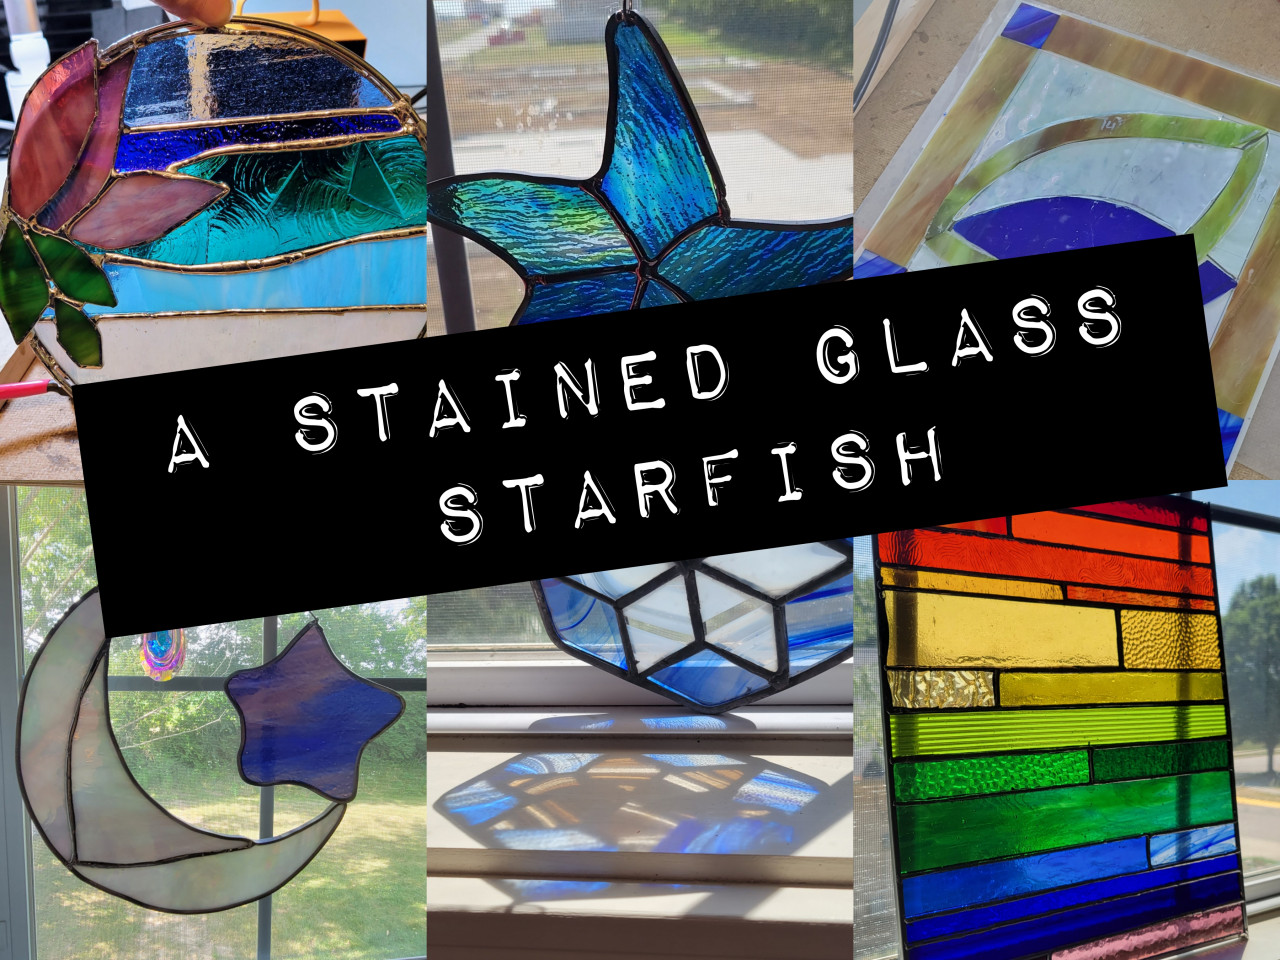 A Stained Glass Starfish